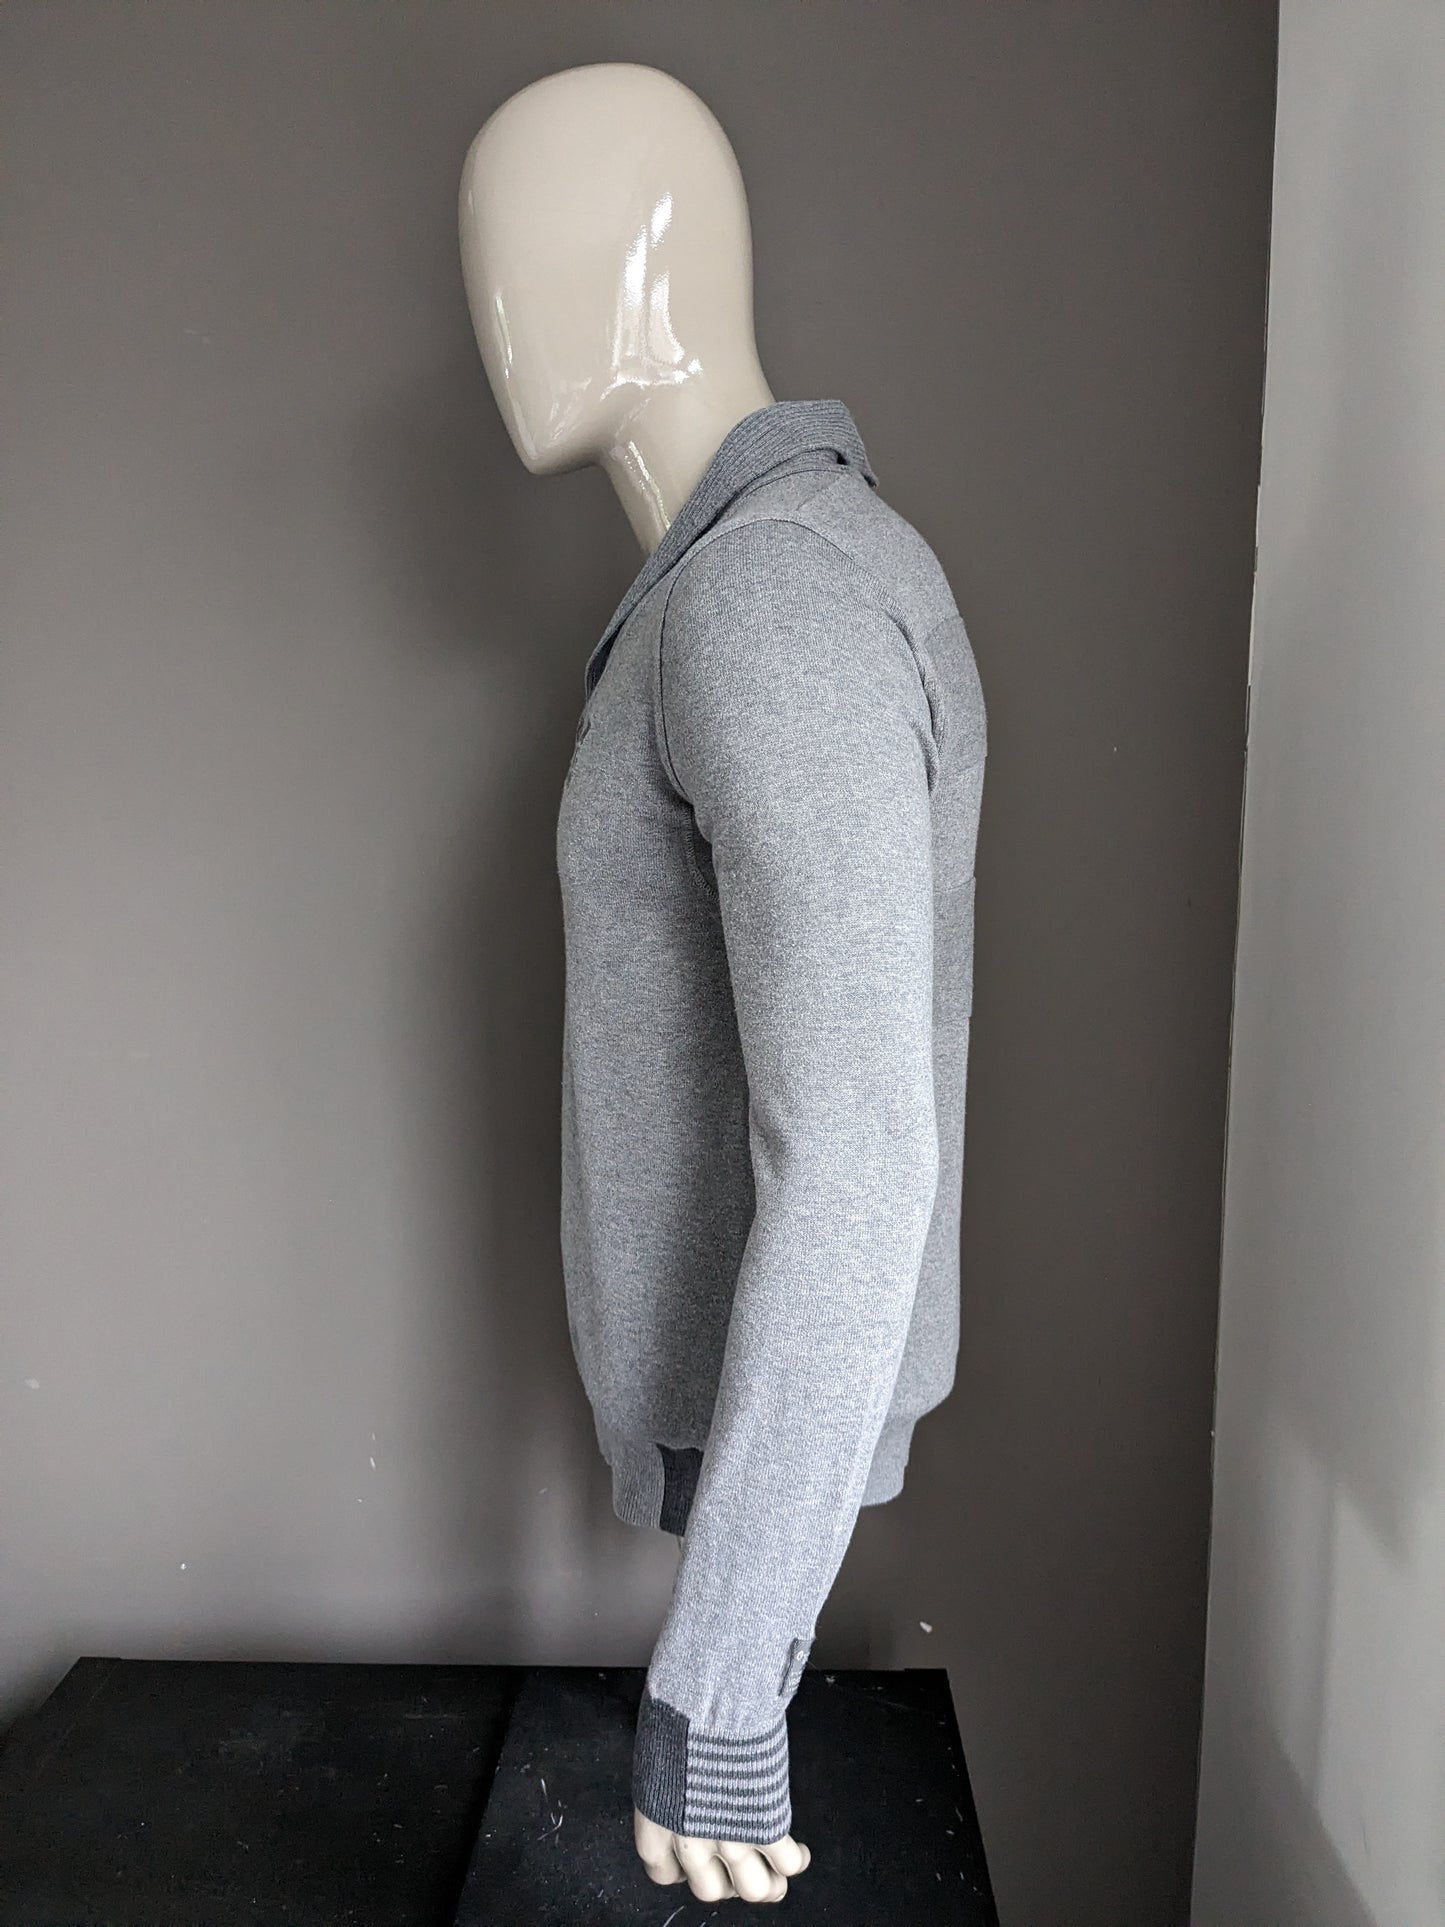 Vanguard sweater with sporty collar and buttons. Gray mixed. Size M.